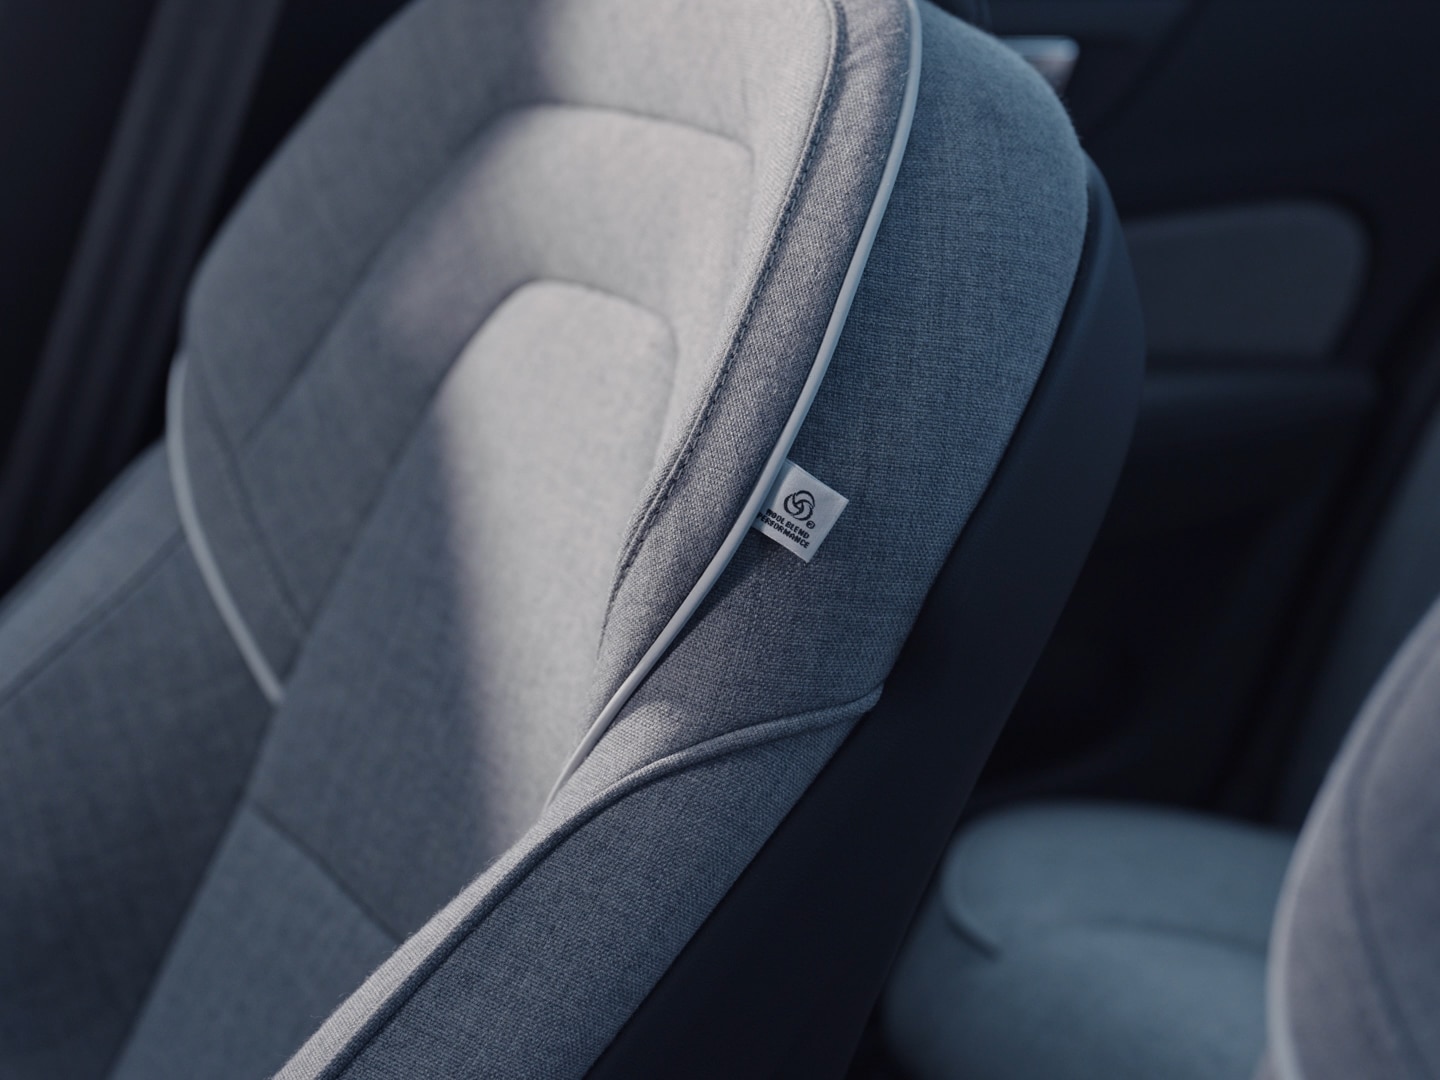 Interior close-up of the leather free Tailored Wool Blend seats in a Volvo S60 Recharge.